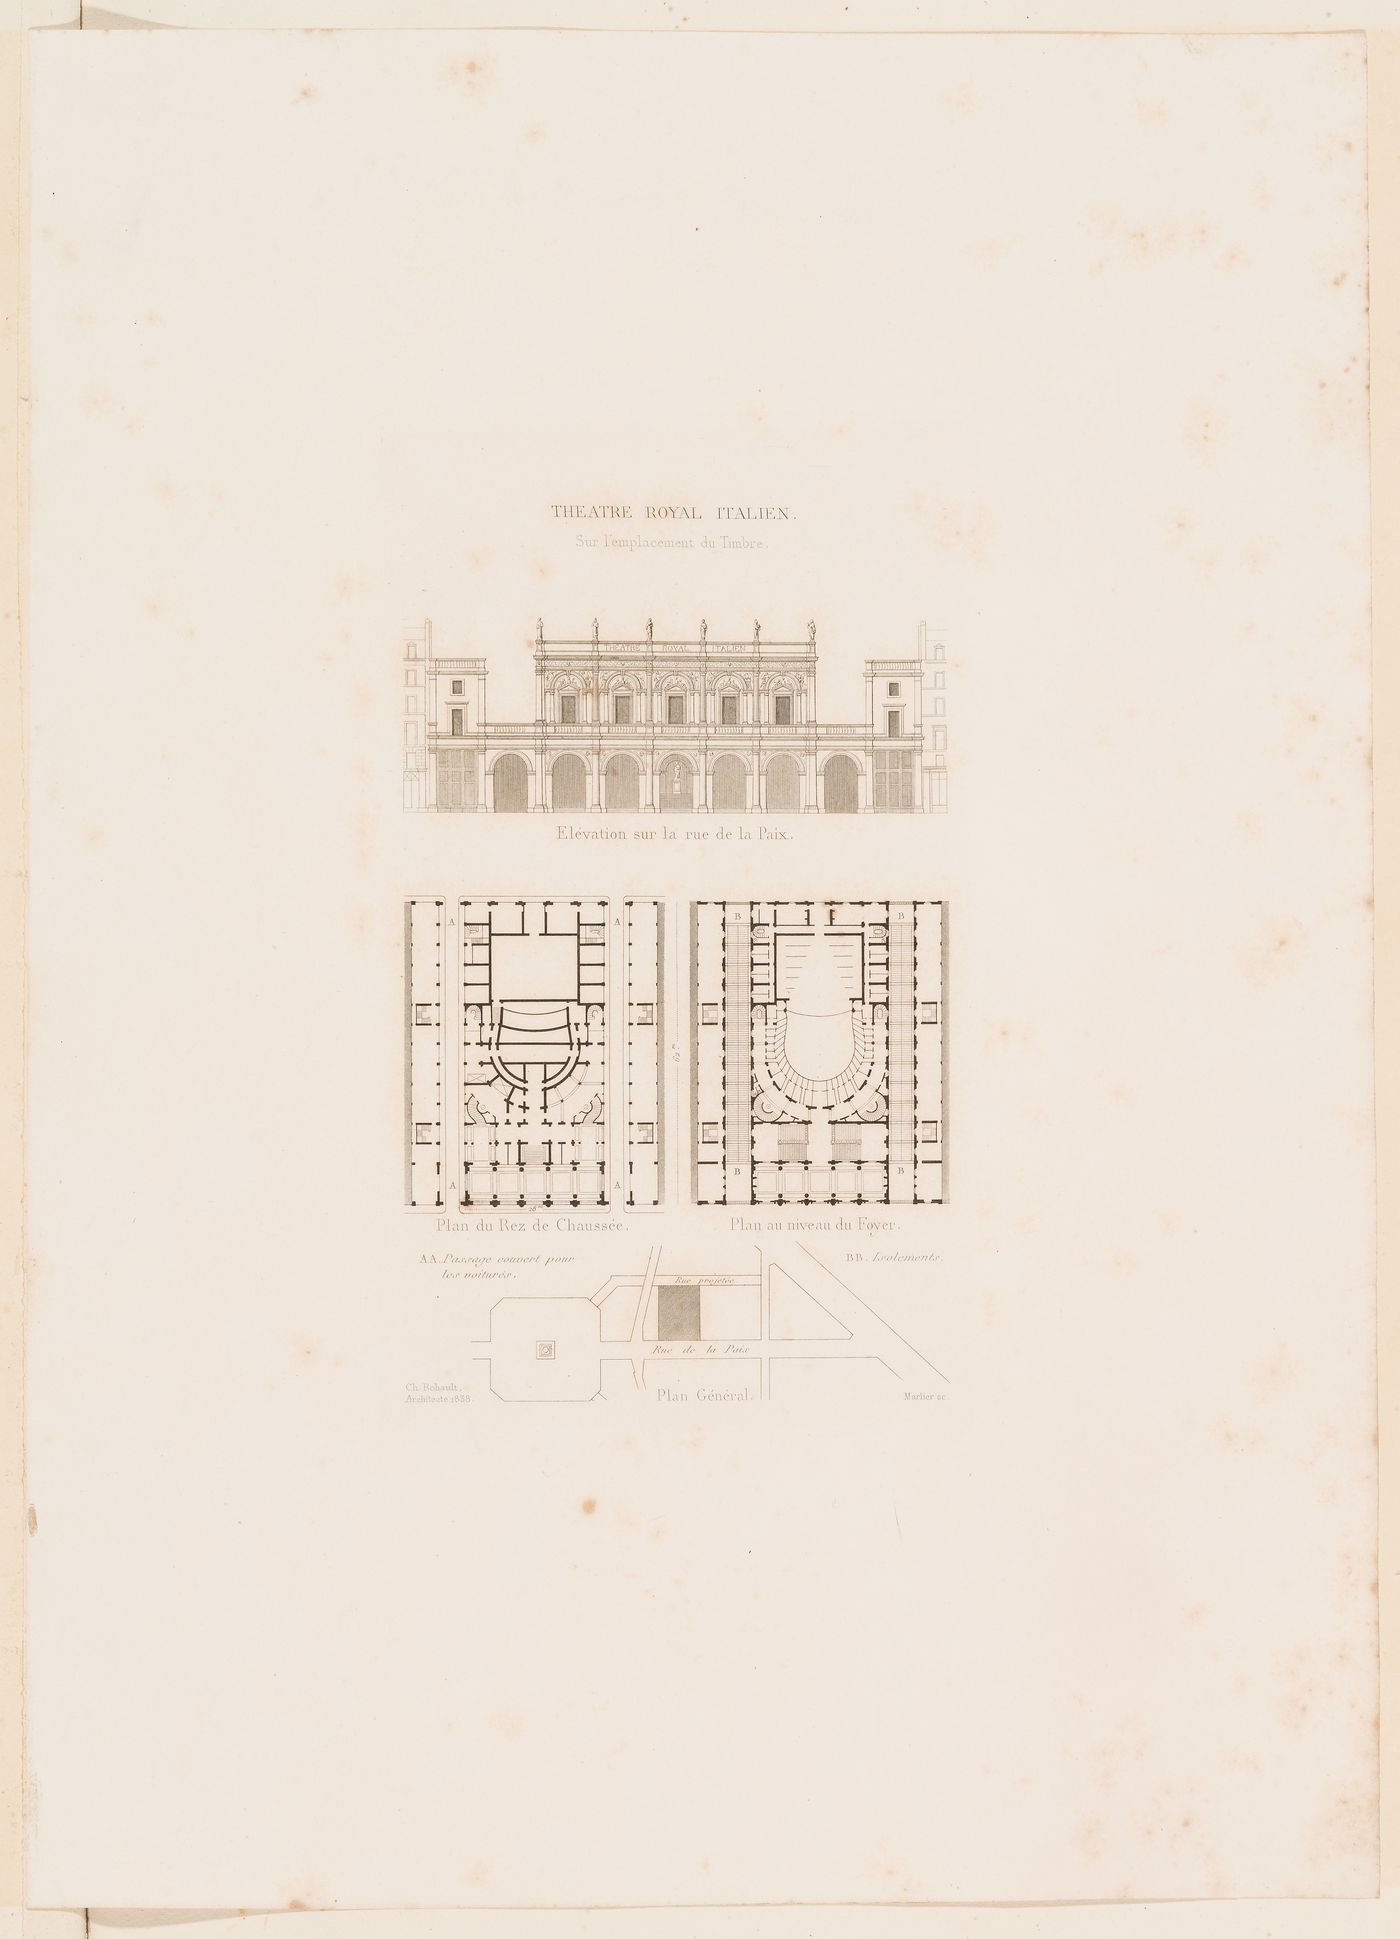 Elevation for the principal façade for the Théâtre Royal Italien, with site plan and ground floor and "niveau du foyer" plans